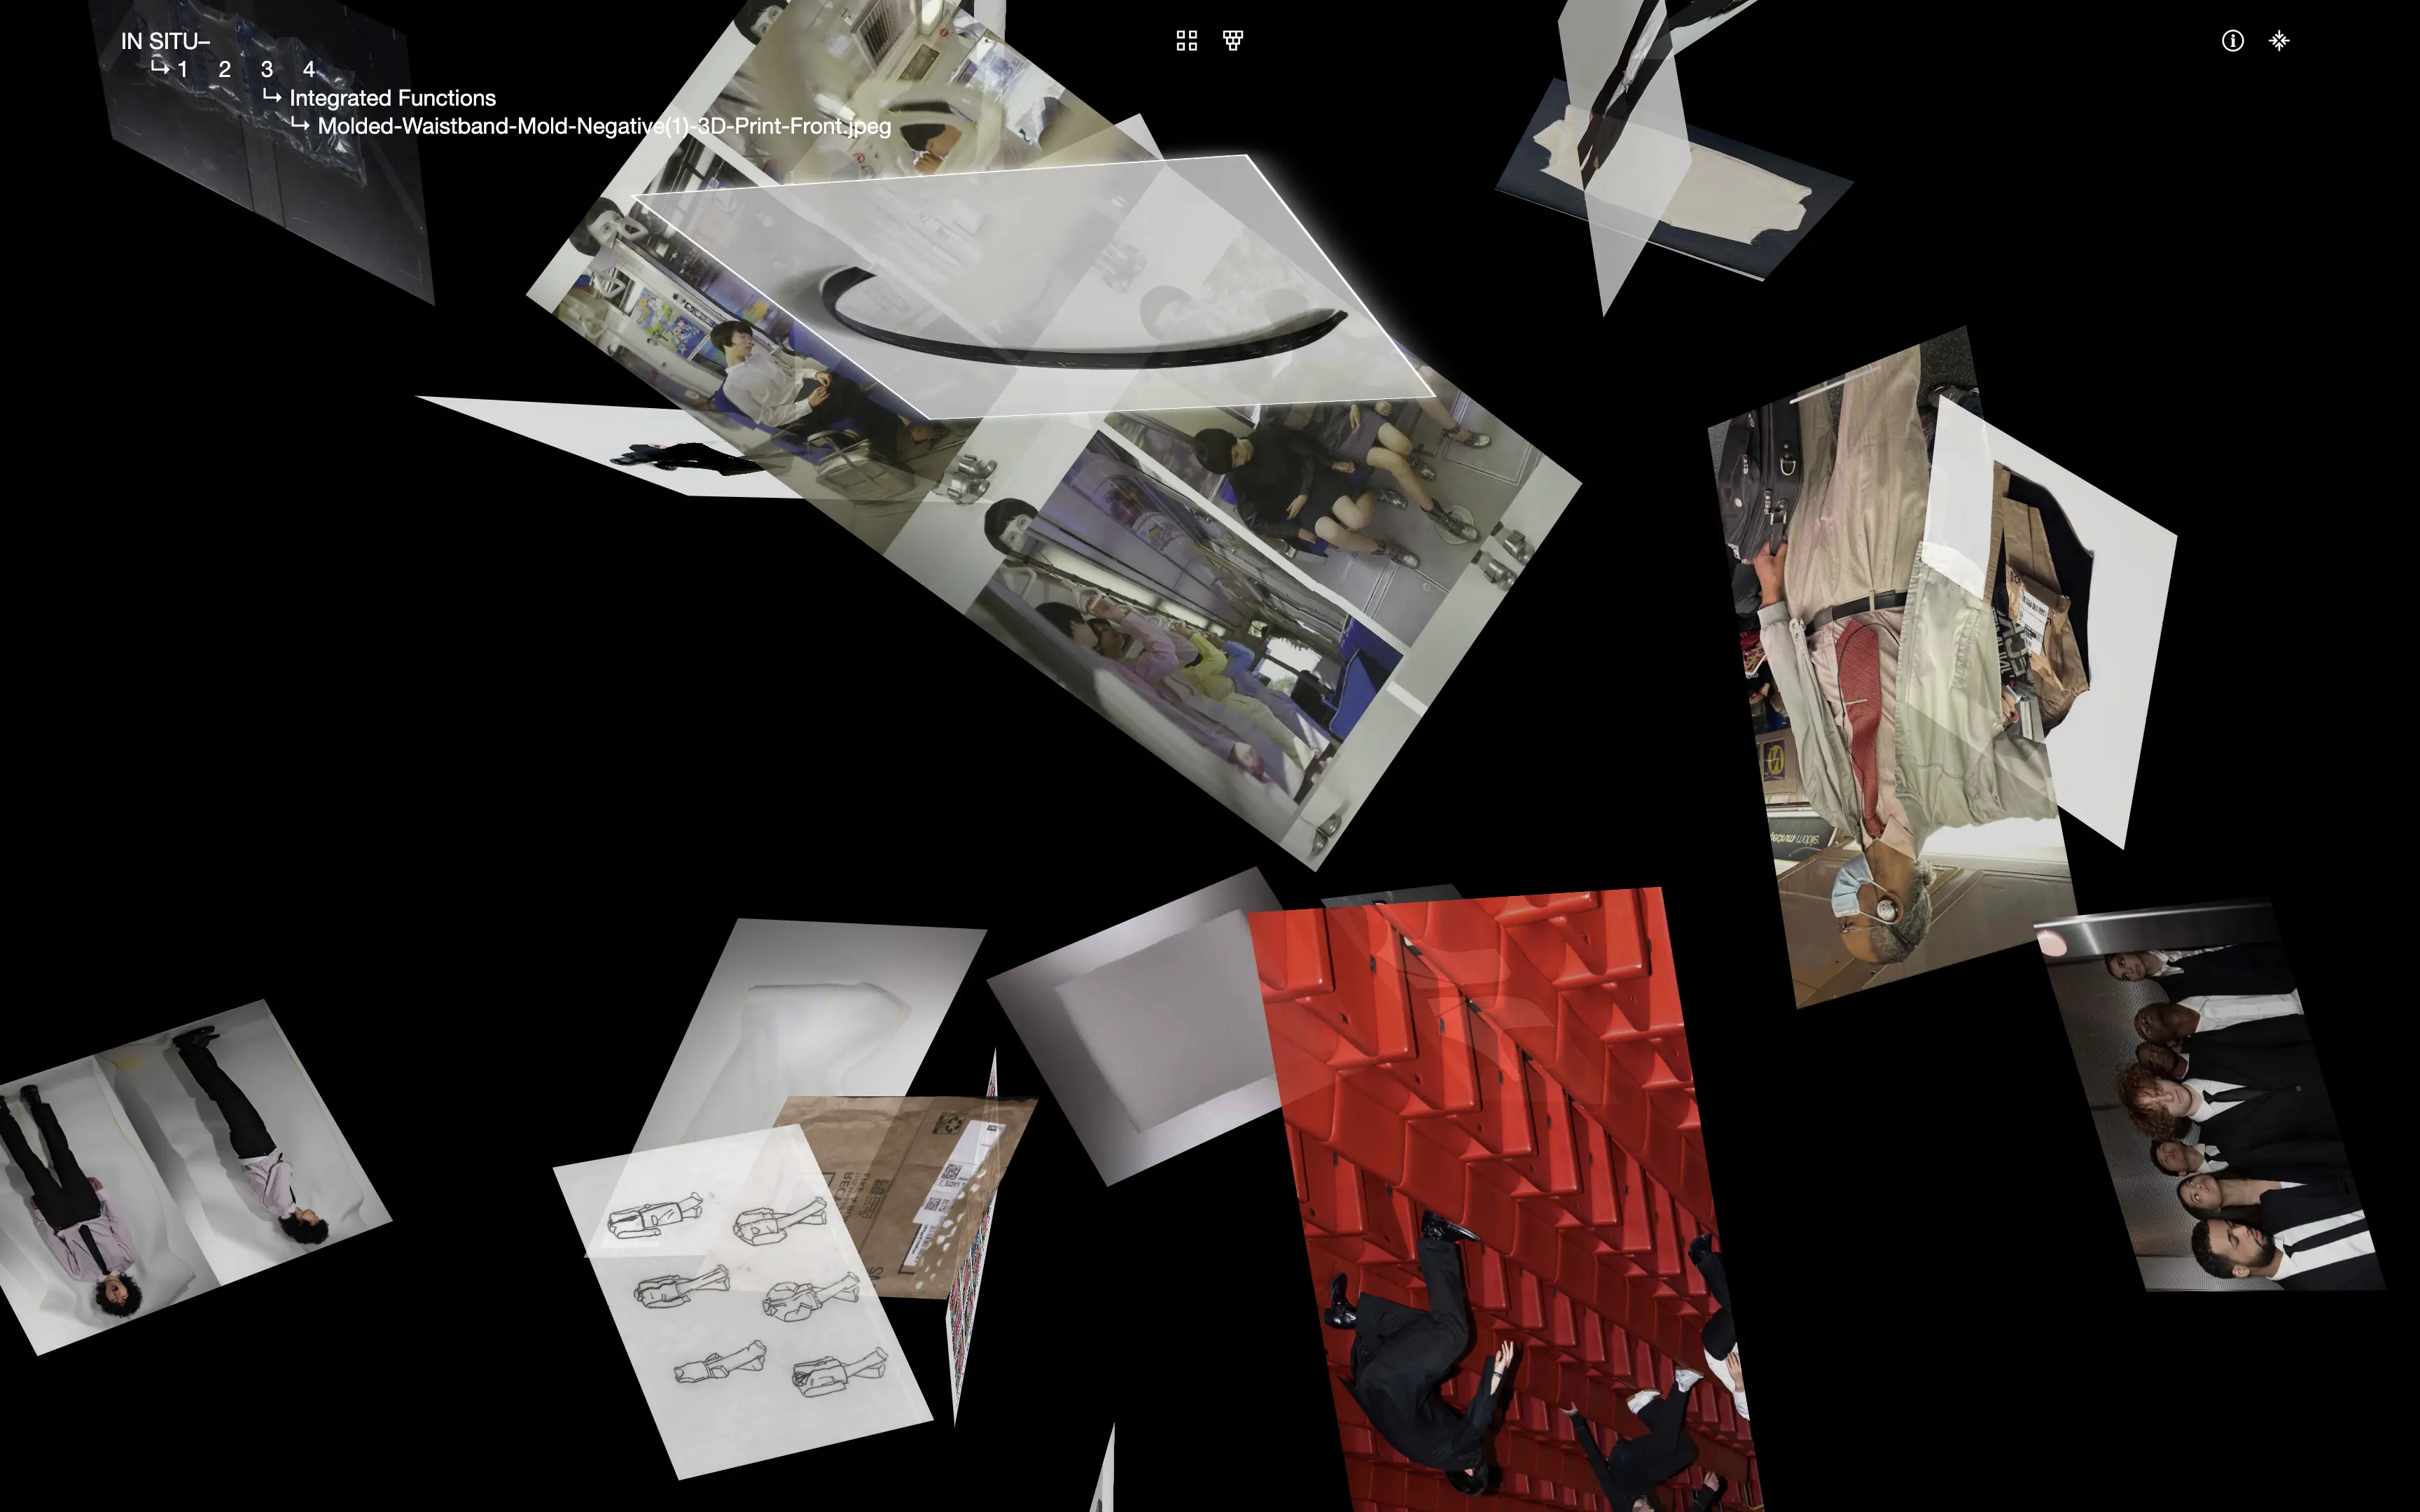 insitu.directory fragments: 21 images scattered in 3D space